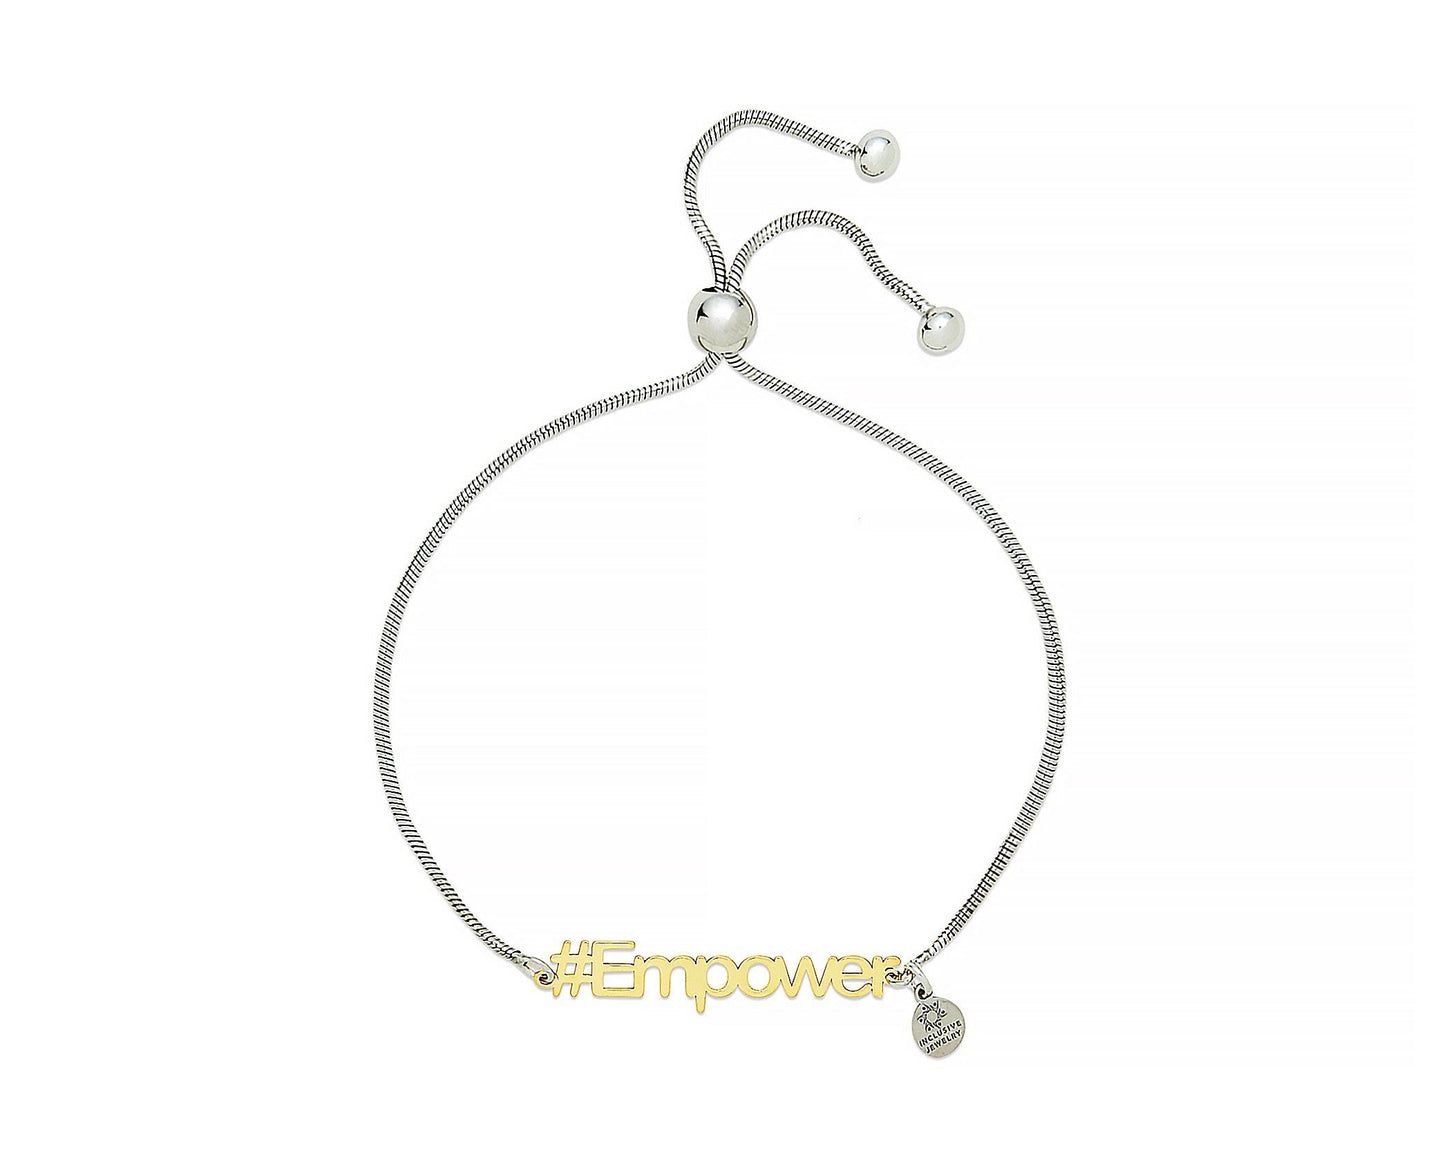 Empower Hashtag Bracelet - InclusiveJewelry